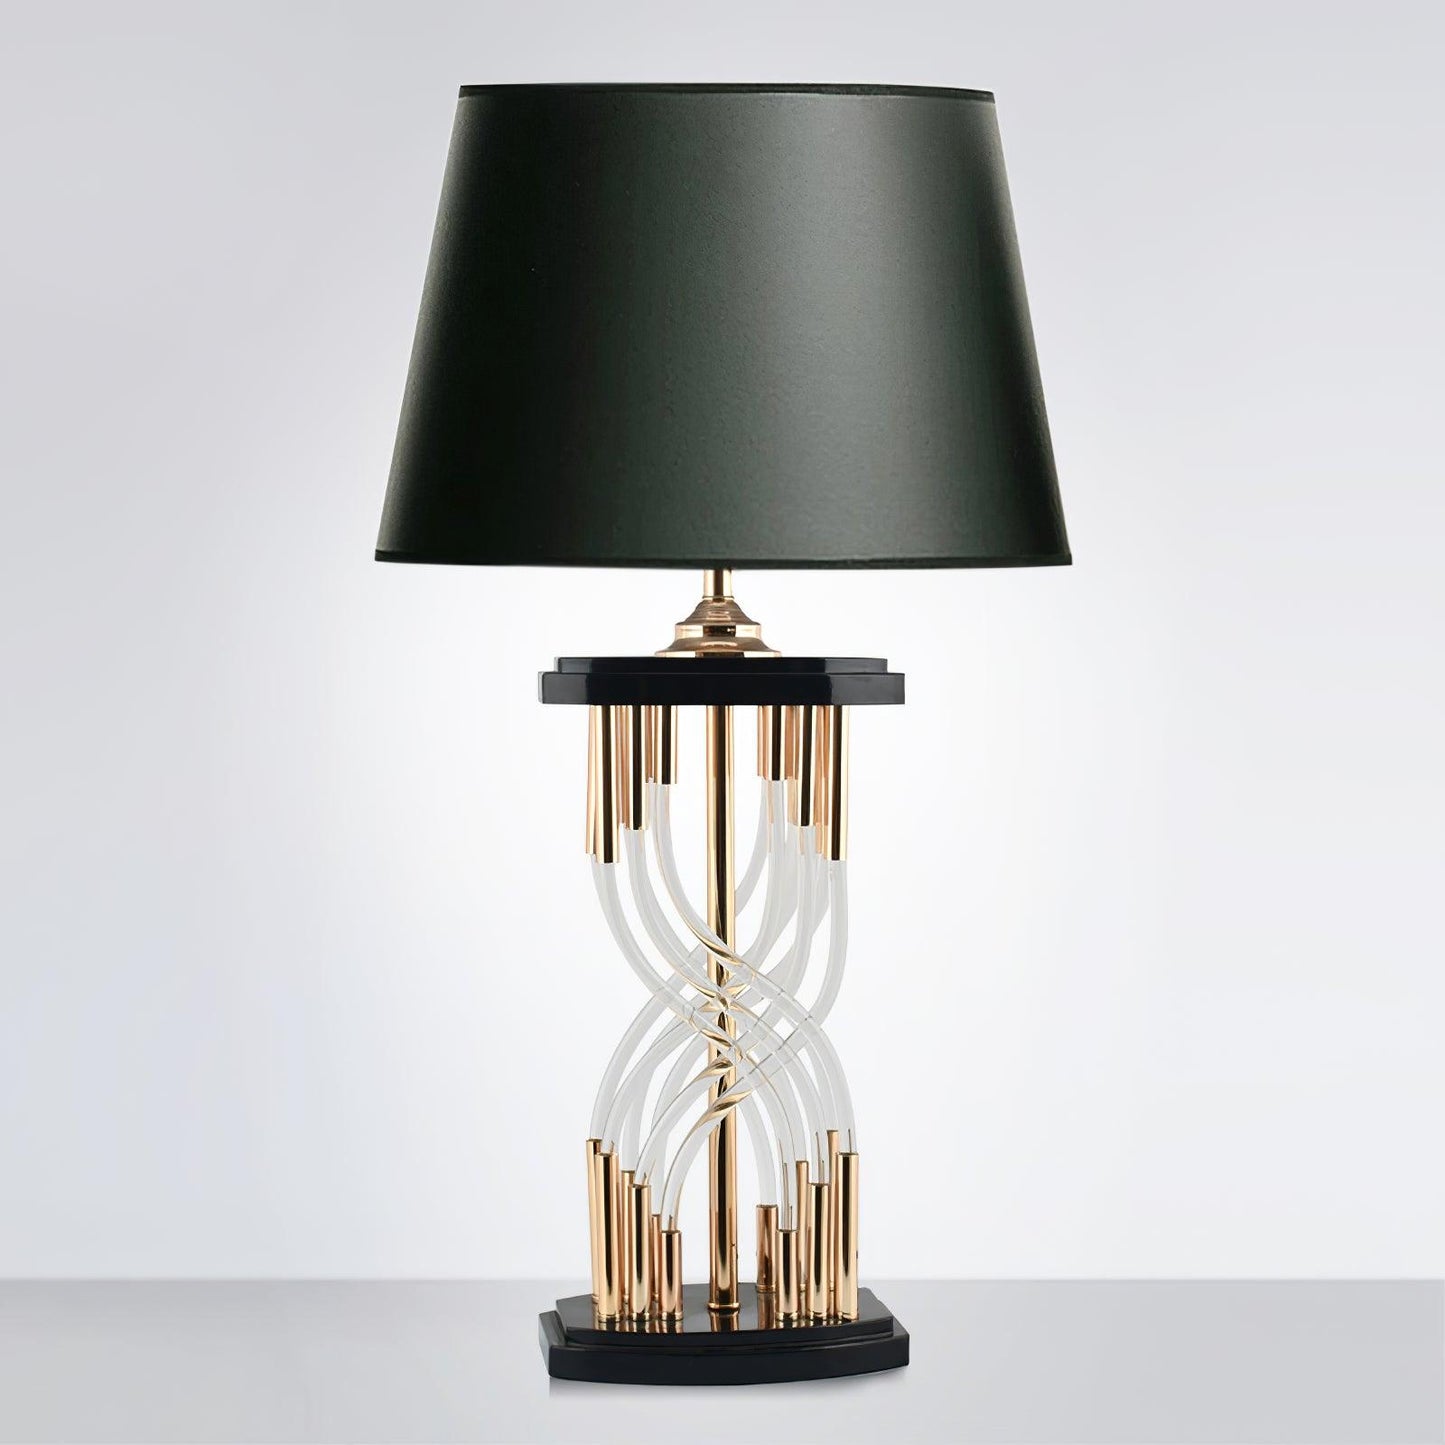 Rock And Rule Table Lamp